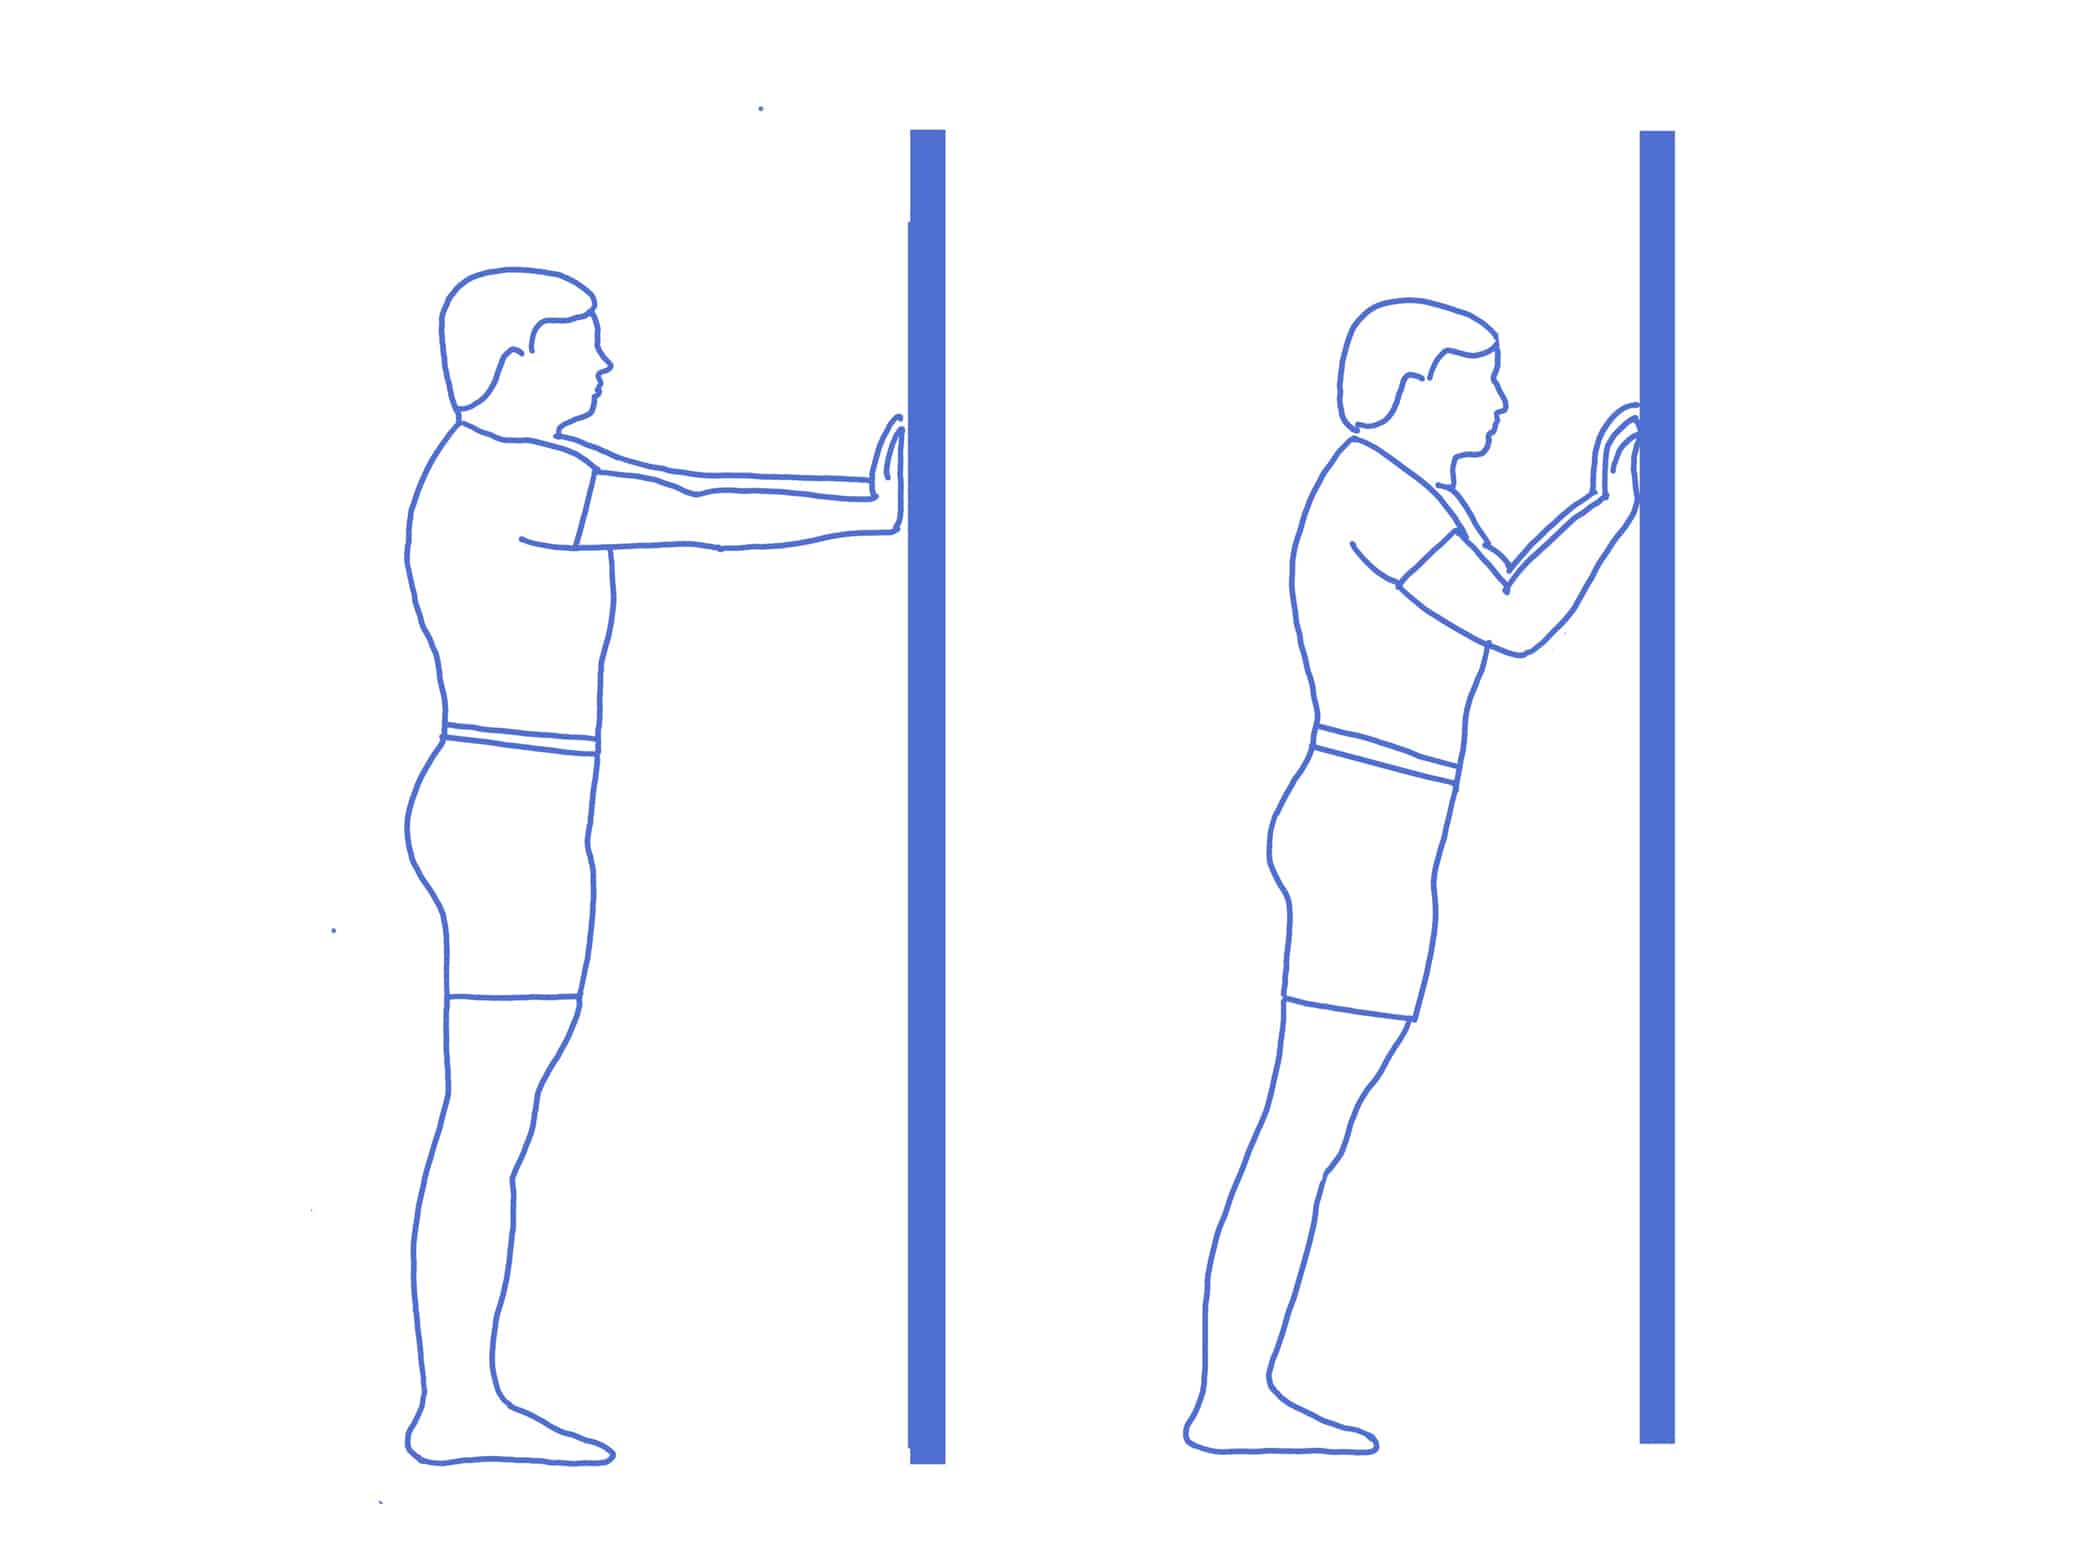 illustration of man sanding by wall doing pushups against wall